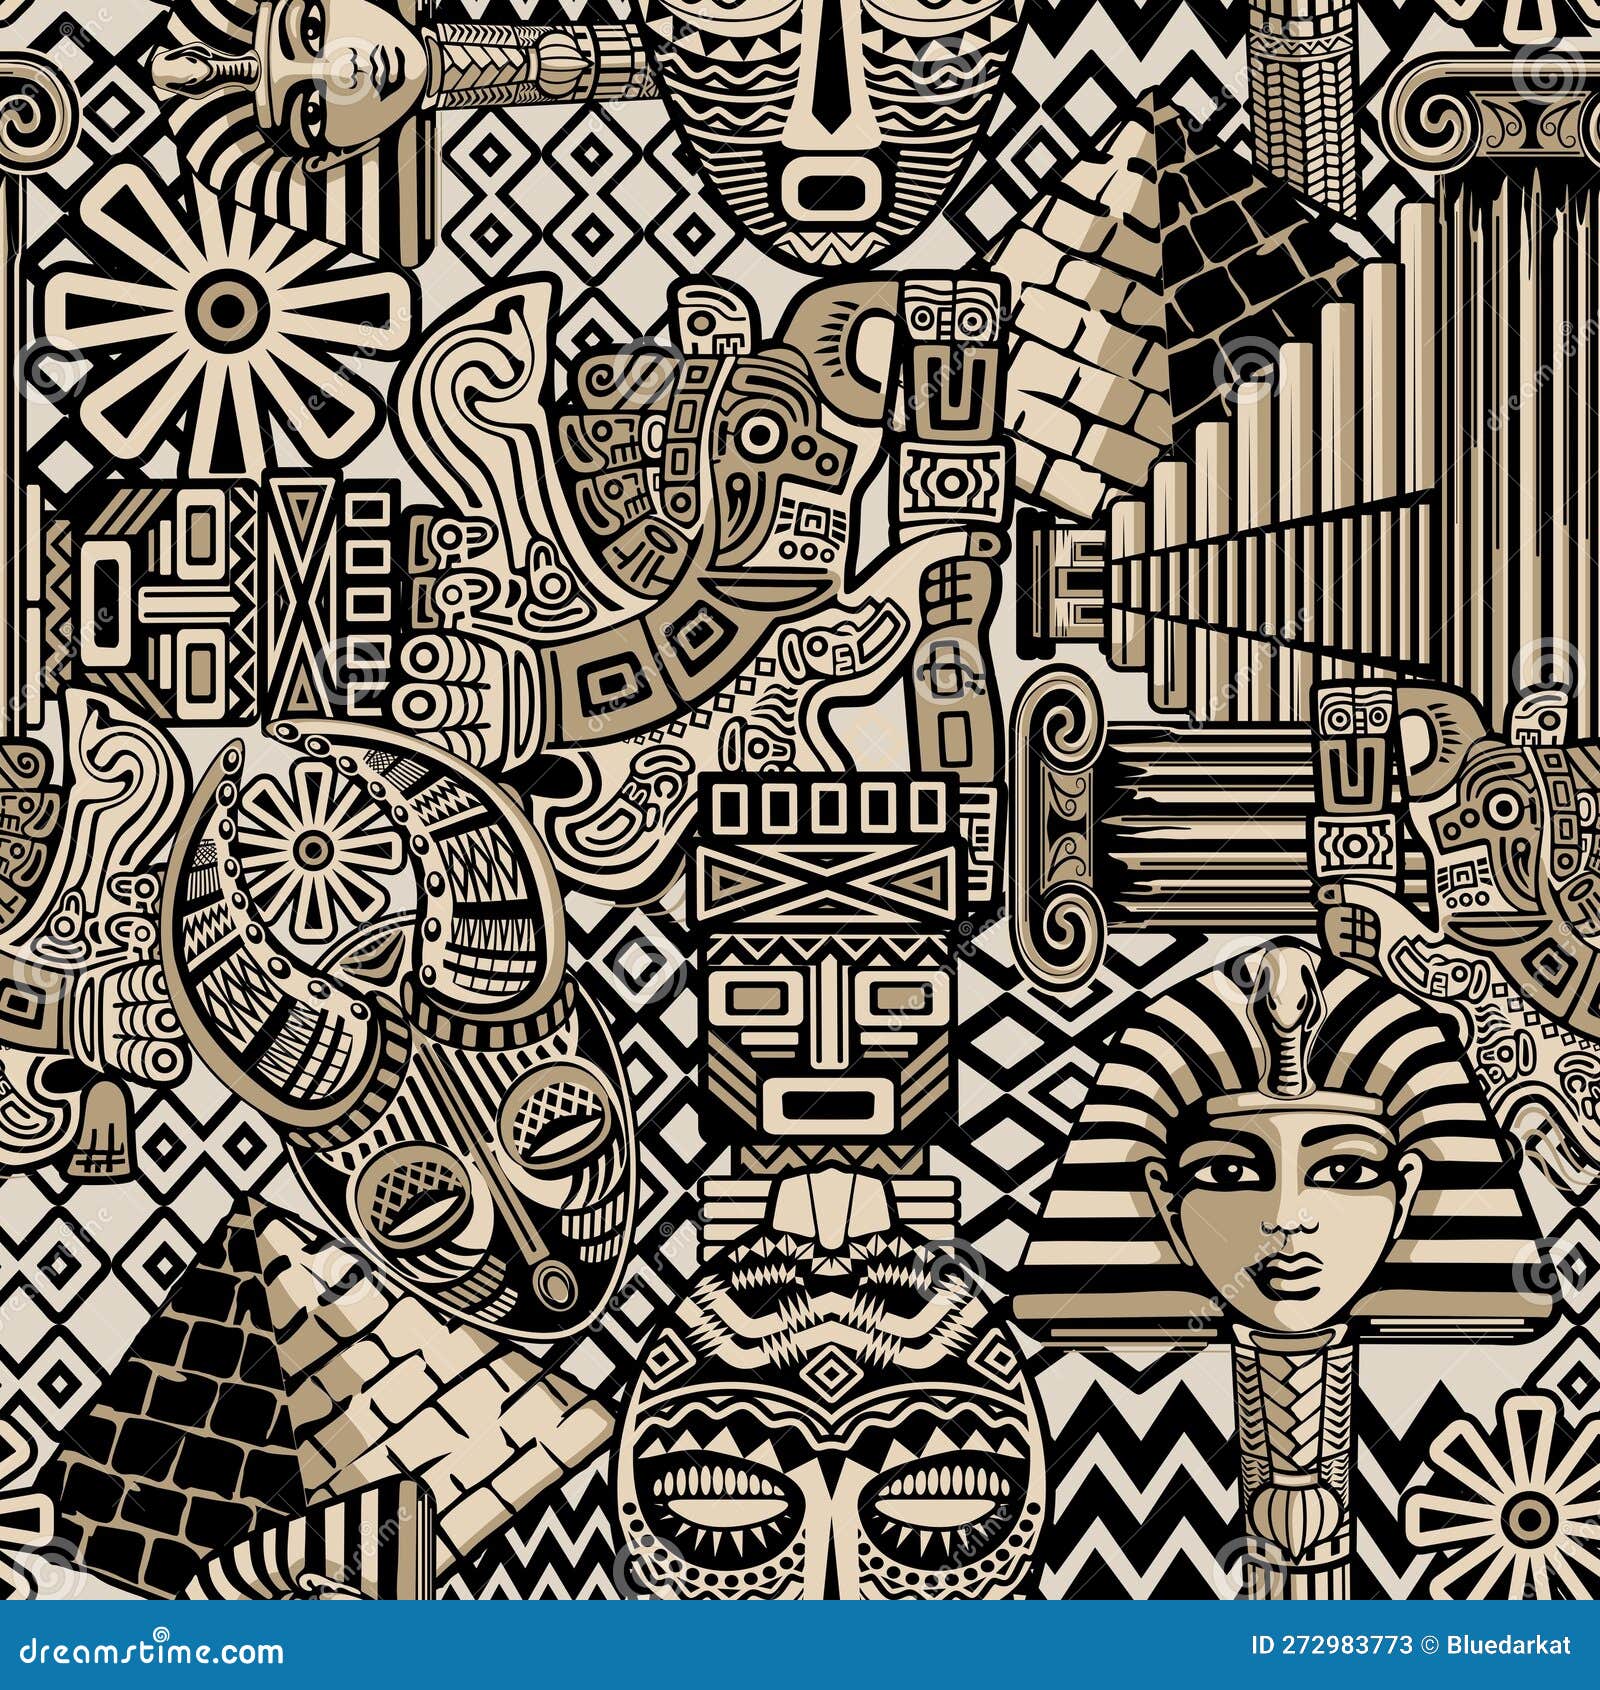 ancient s and architecture, egypt, greece, aztecs, africa, tribal figures and art  seamless pattern 